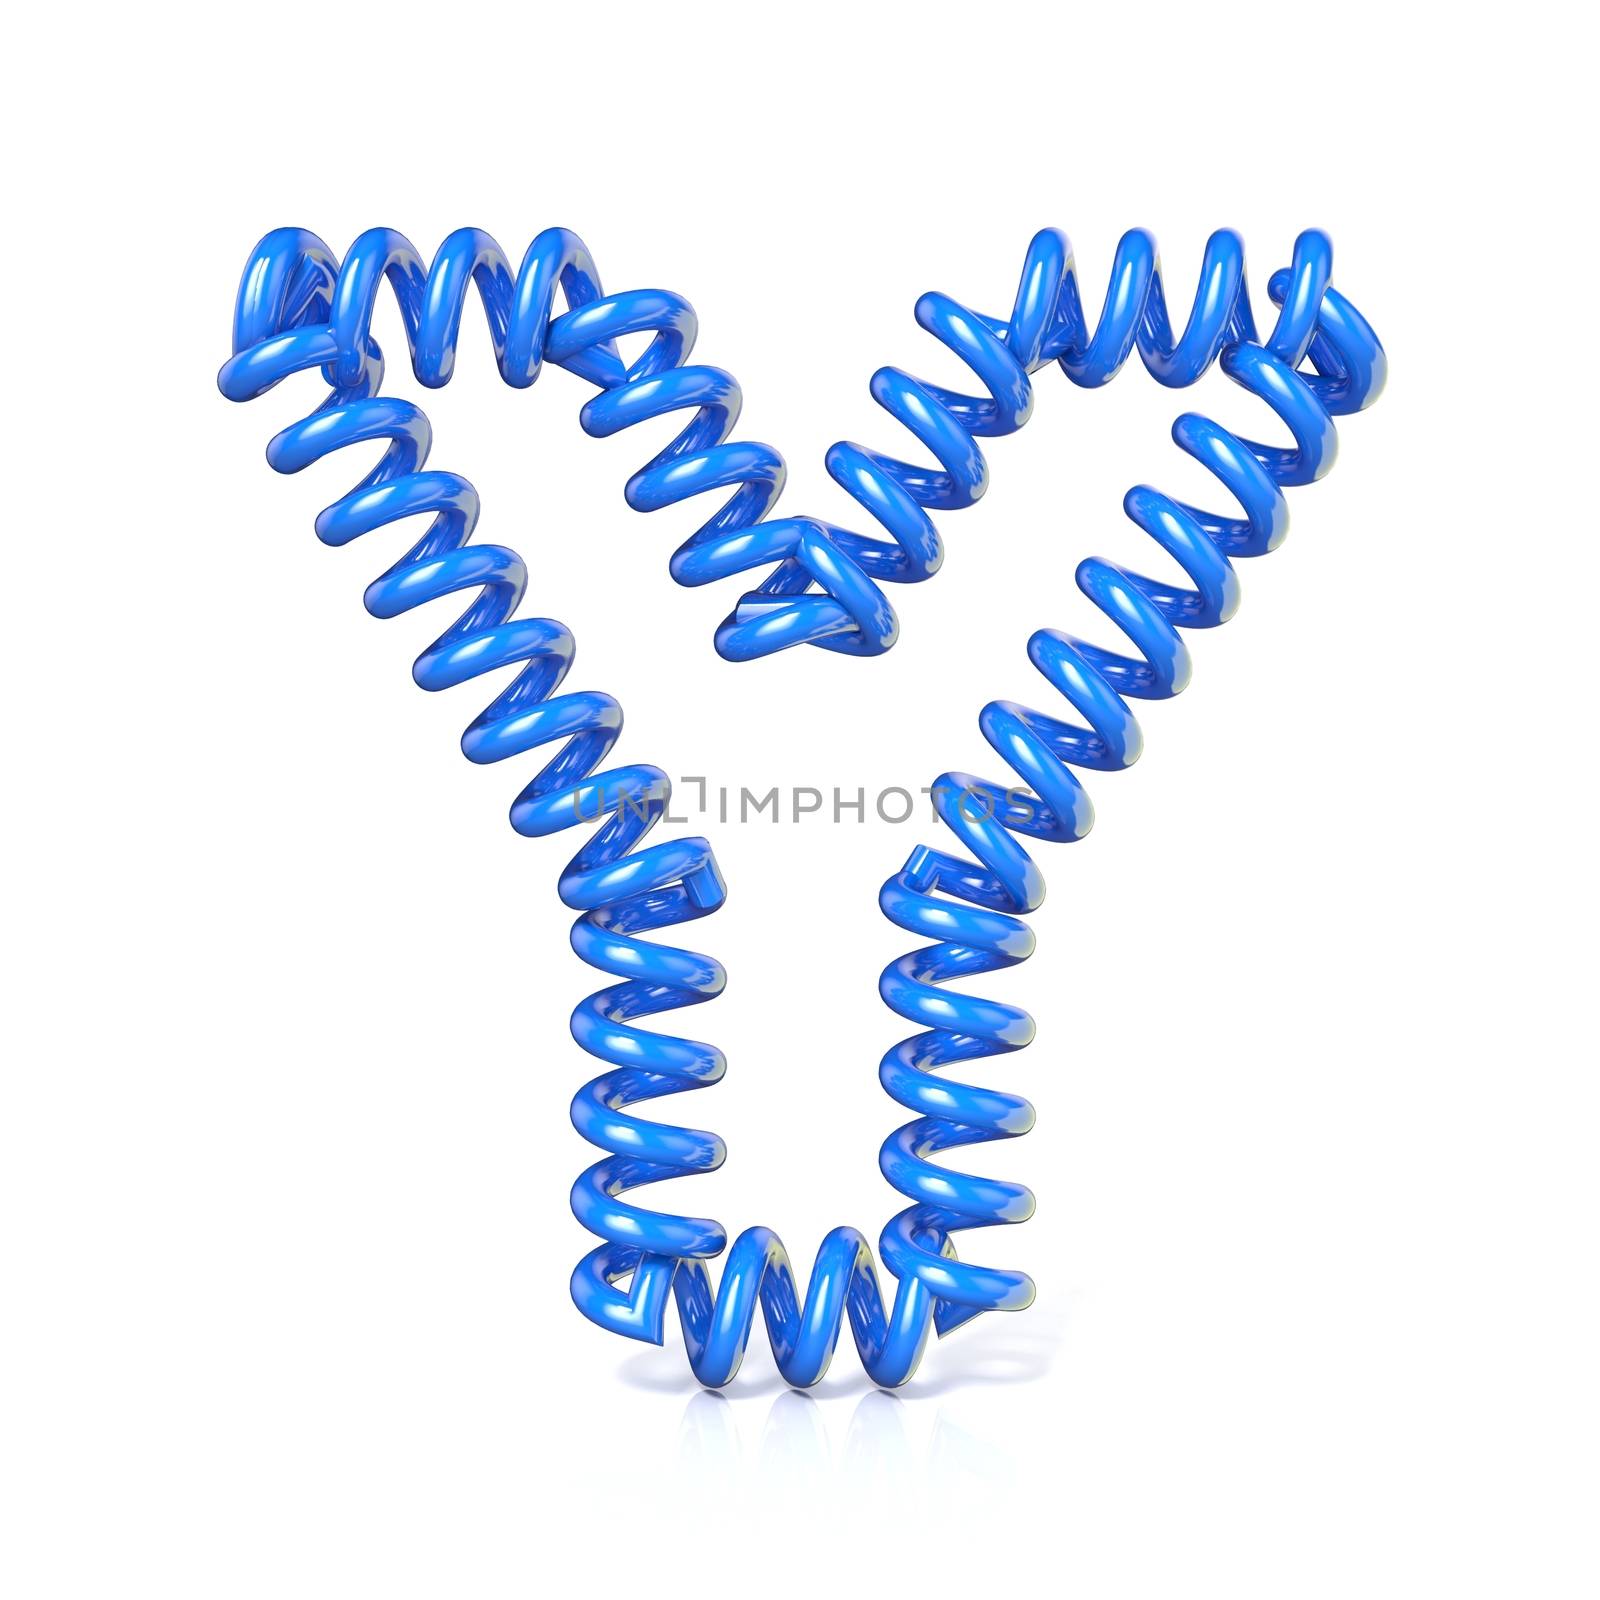 Spring, spiral cable font collection letter - Y. 3D render illustration, isolated on white background